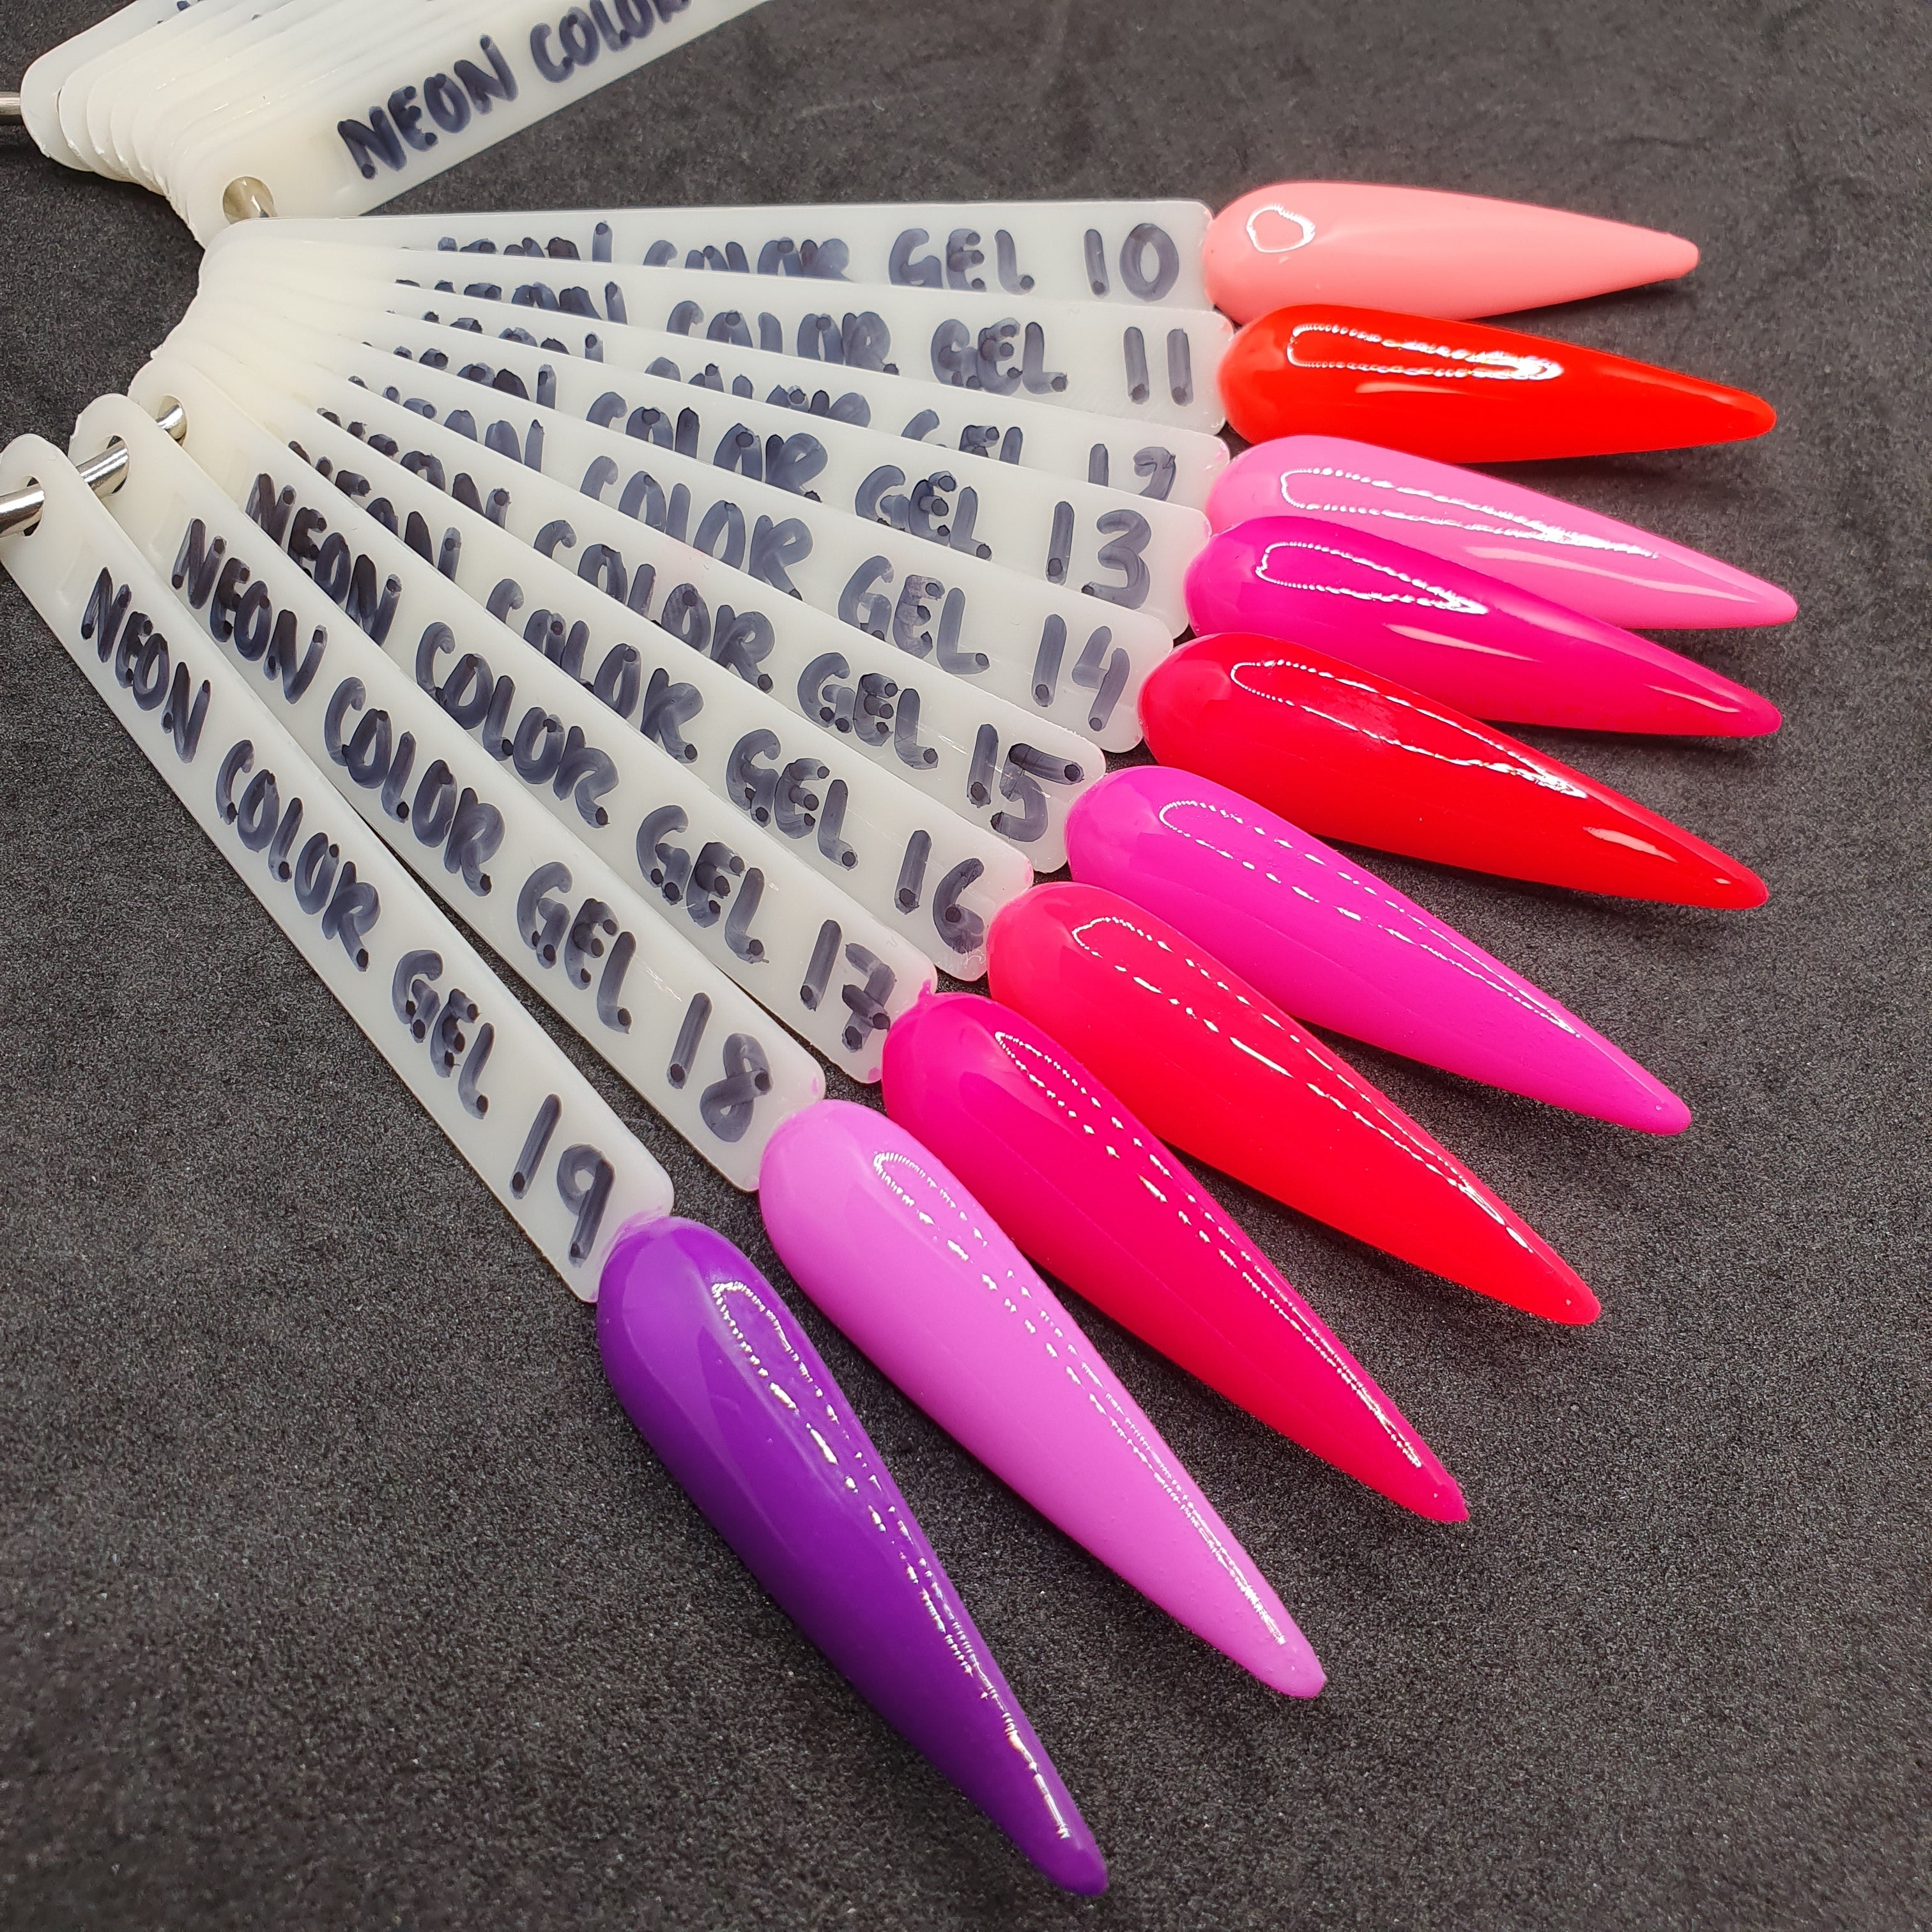 NEW - GND NEON GEL COLOR - 07